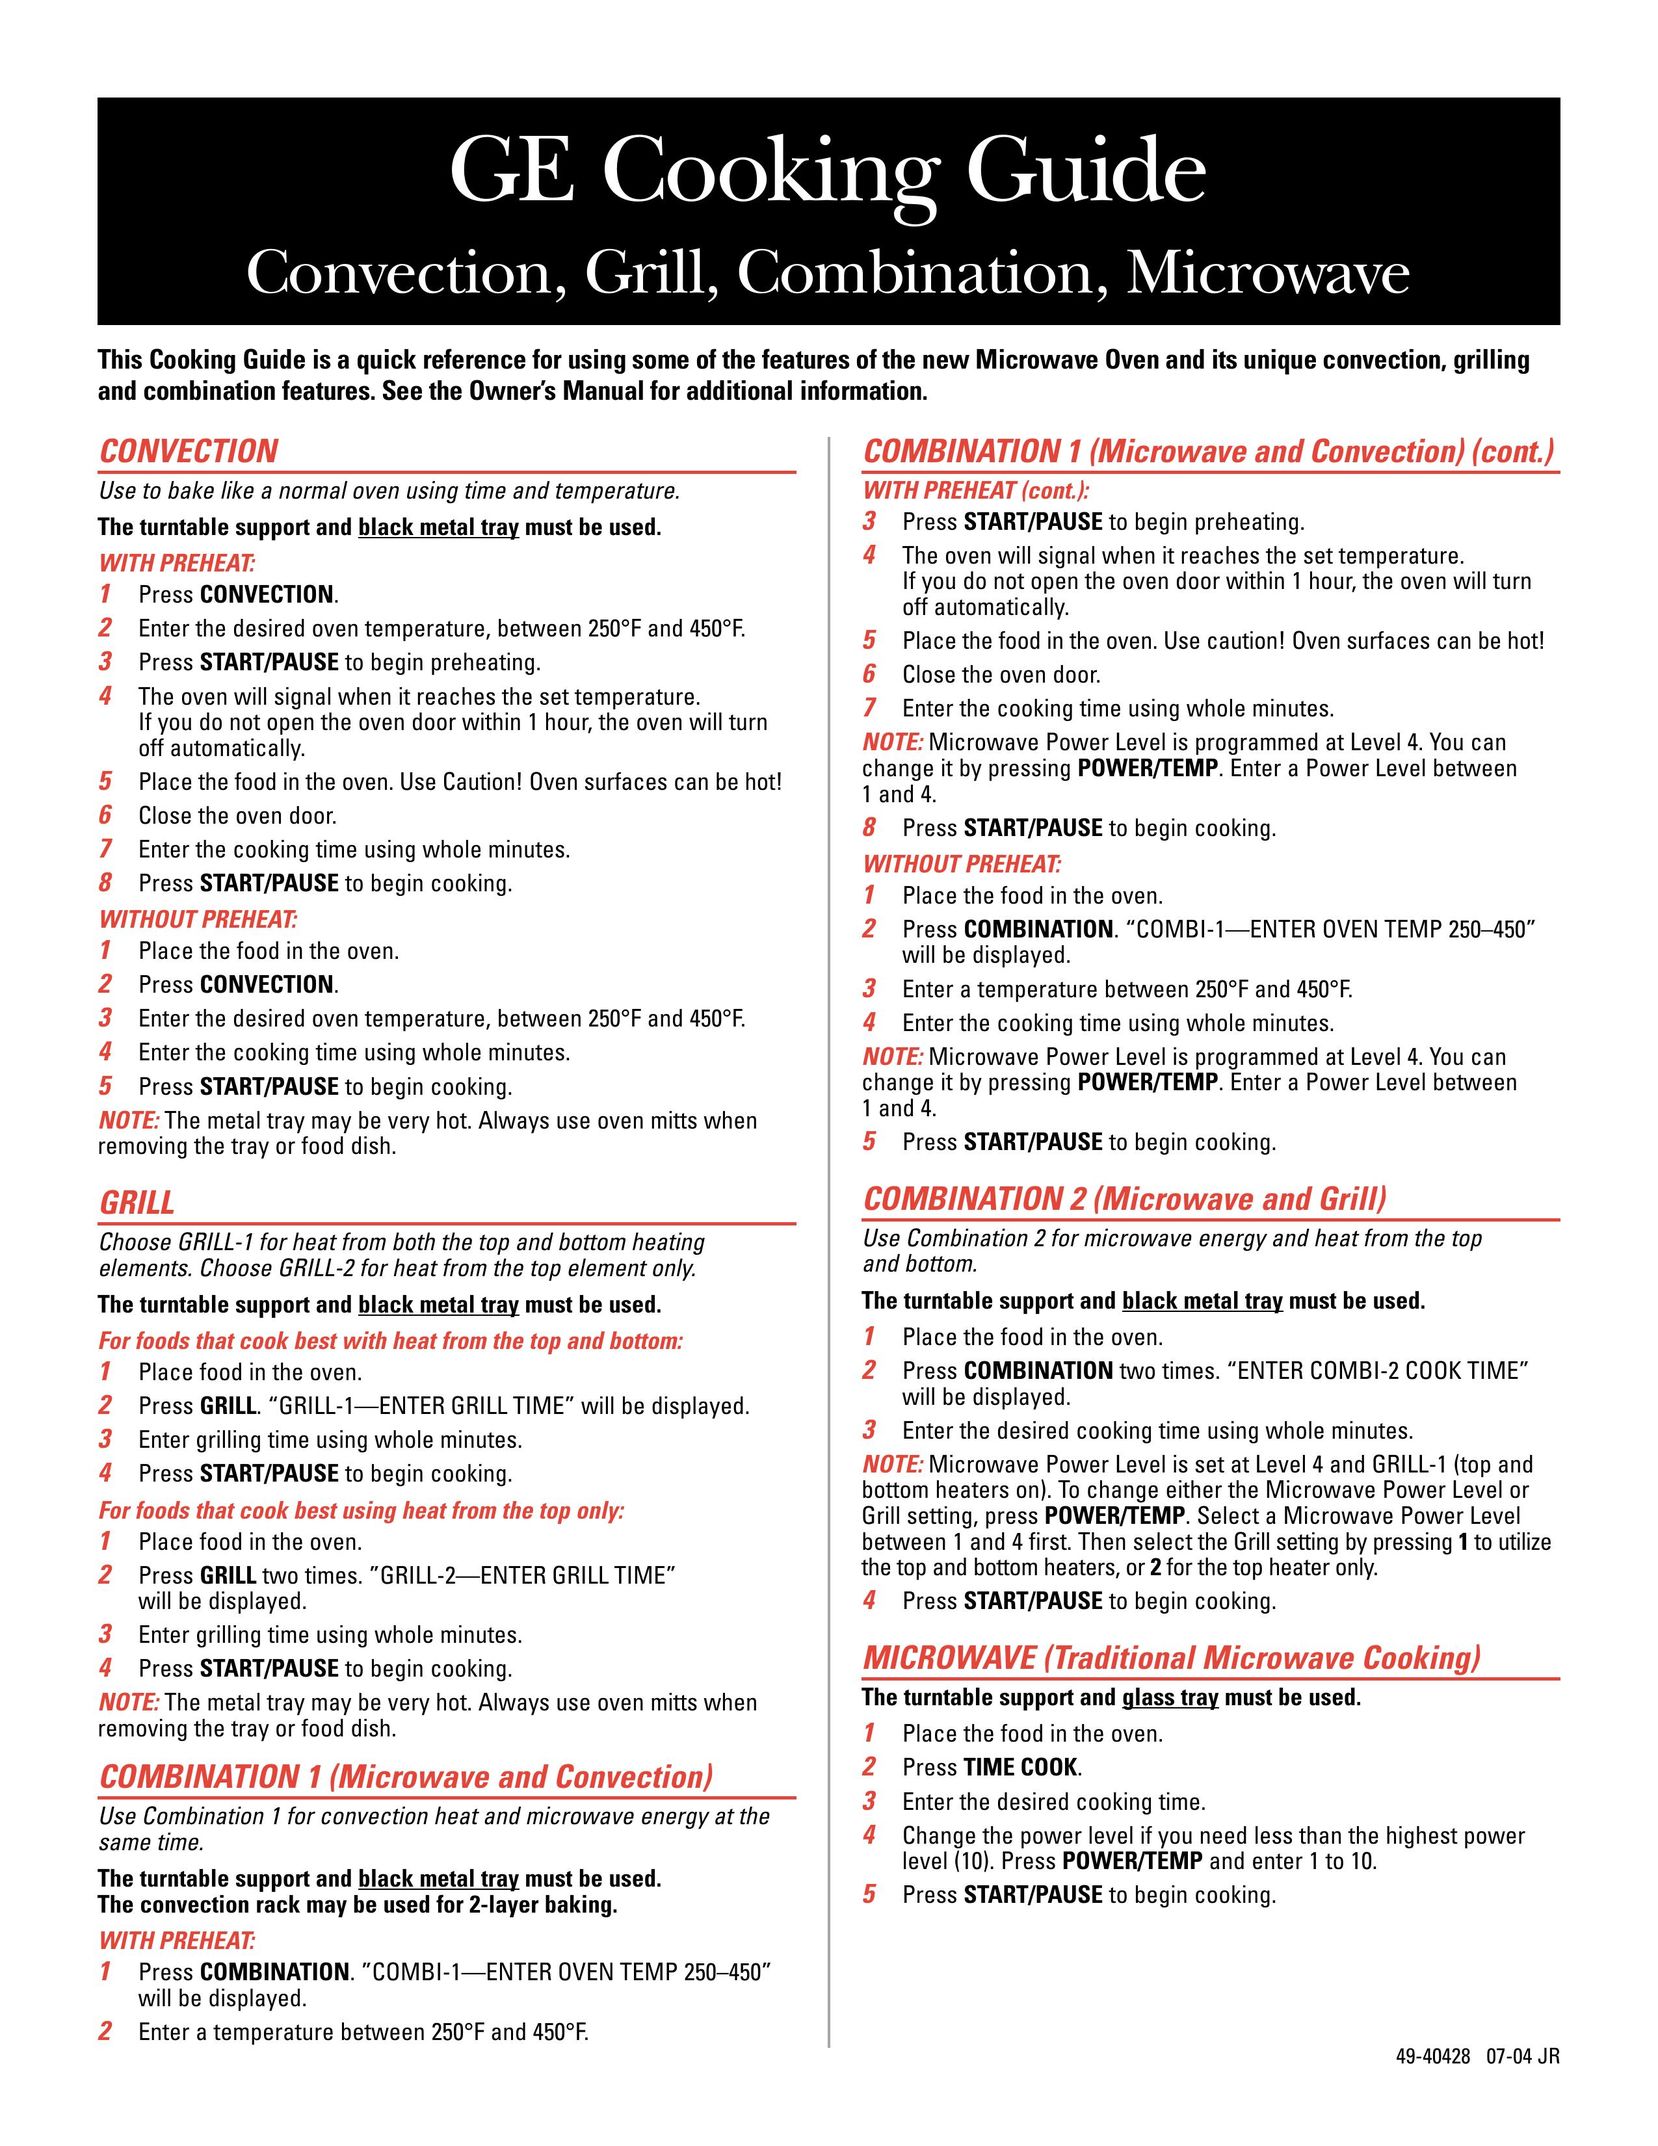 GE Convection Grill Combination Microwave Cooking Guide Convection Oven User Manual